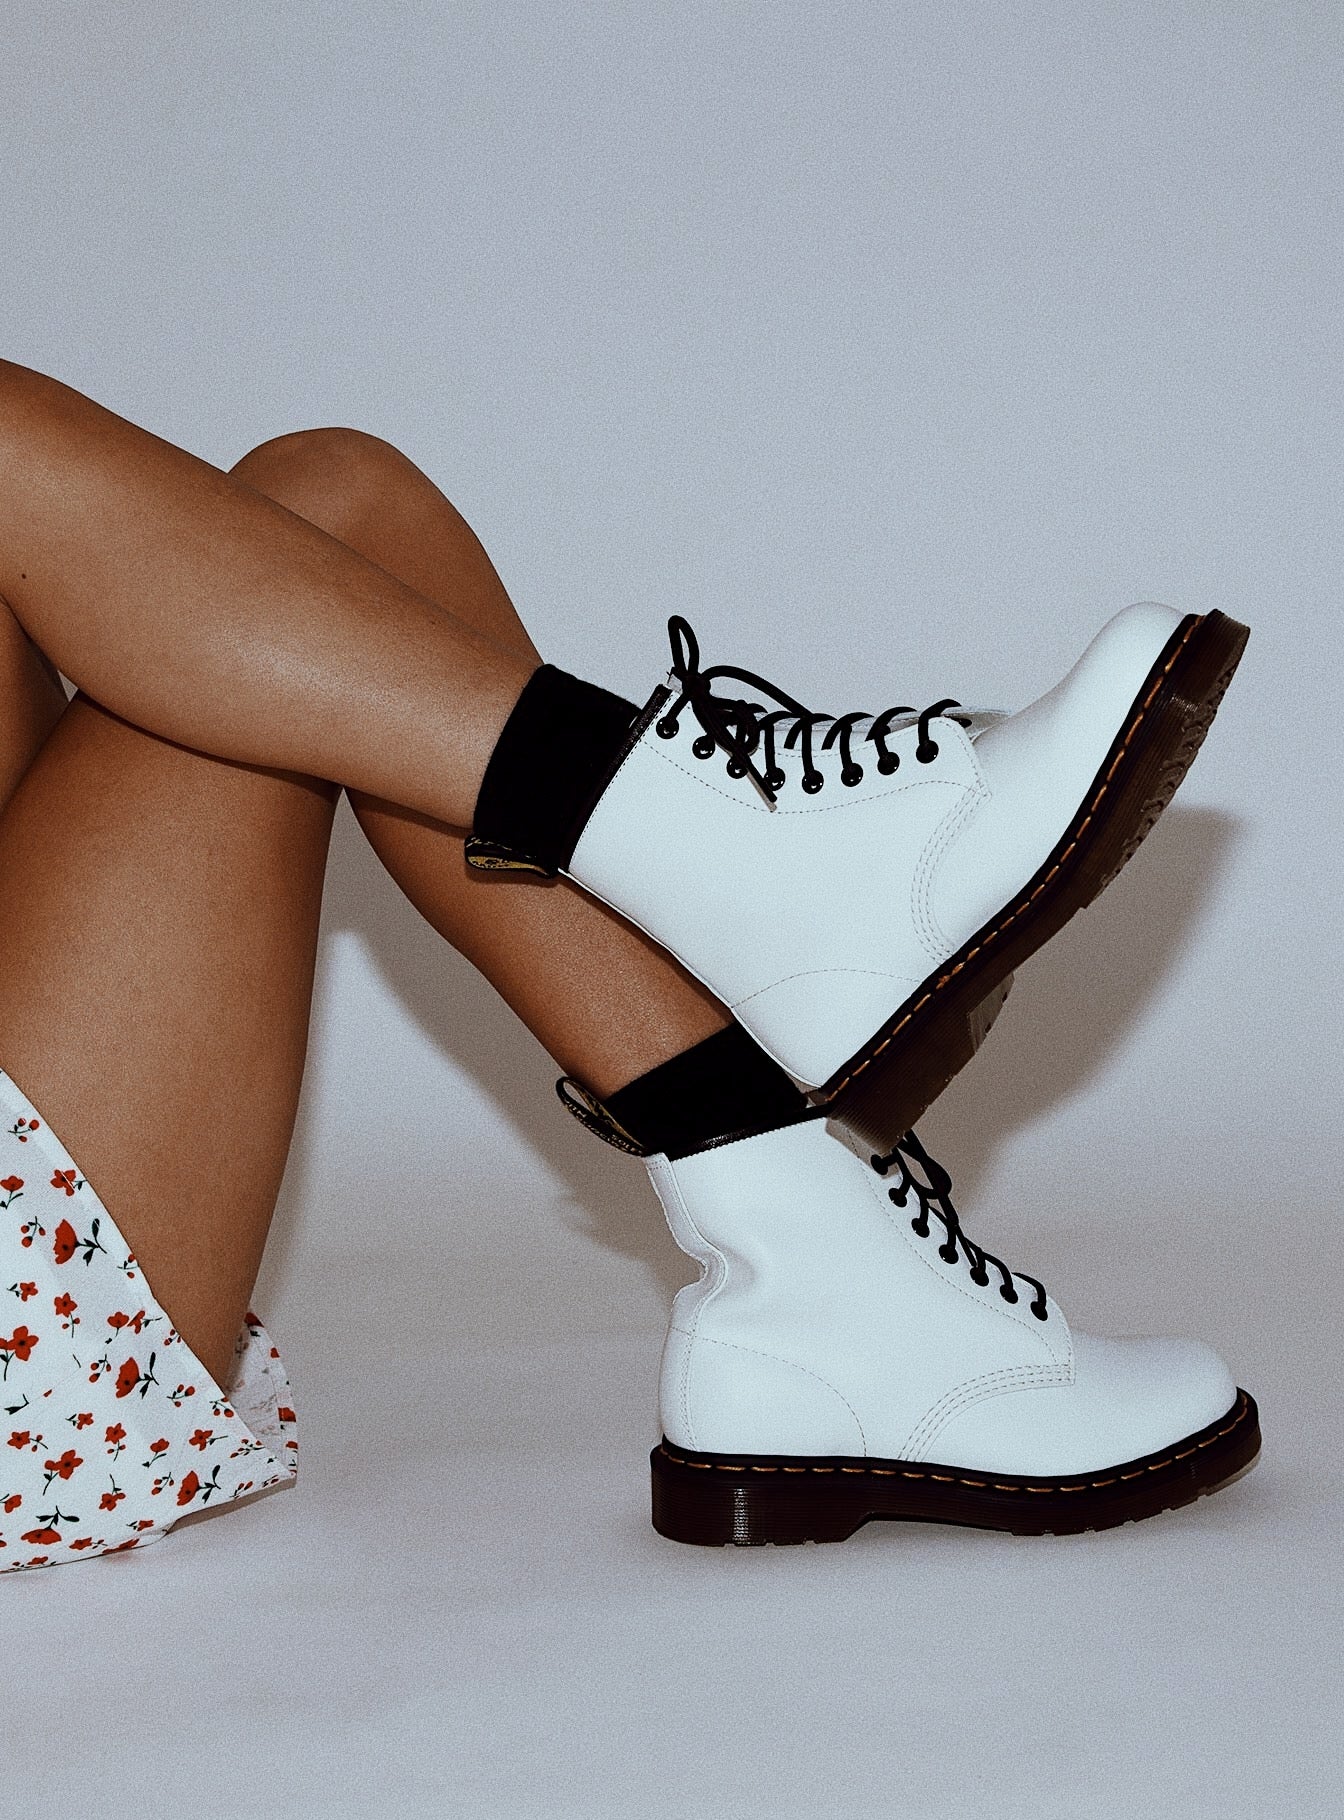 white doc martens outfit